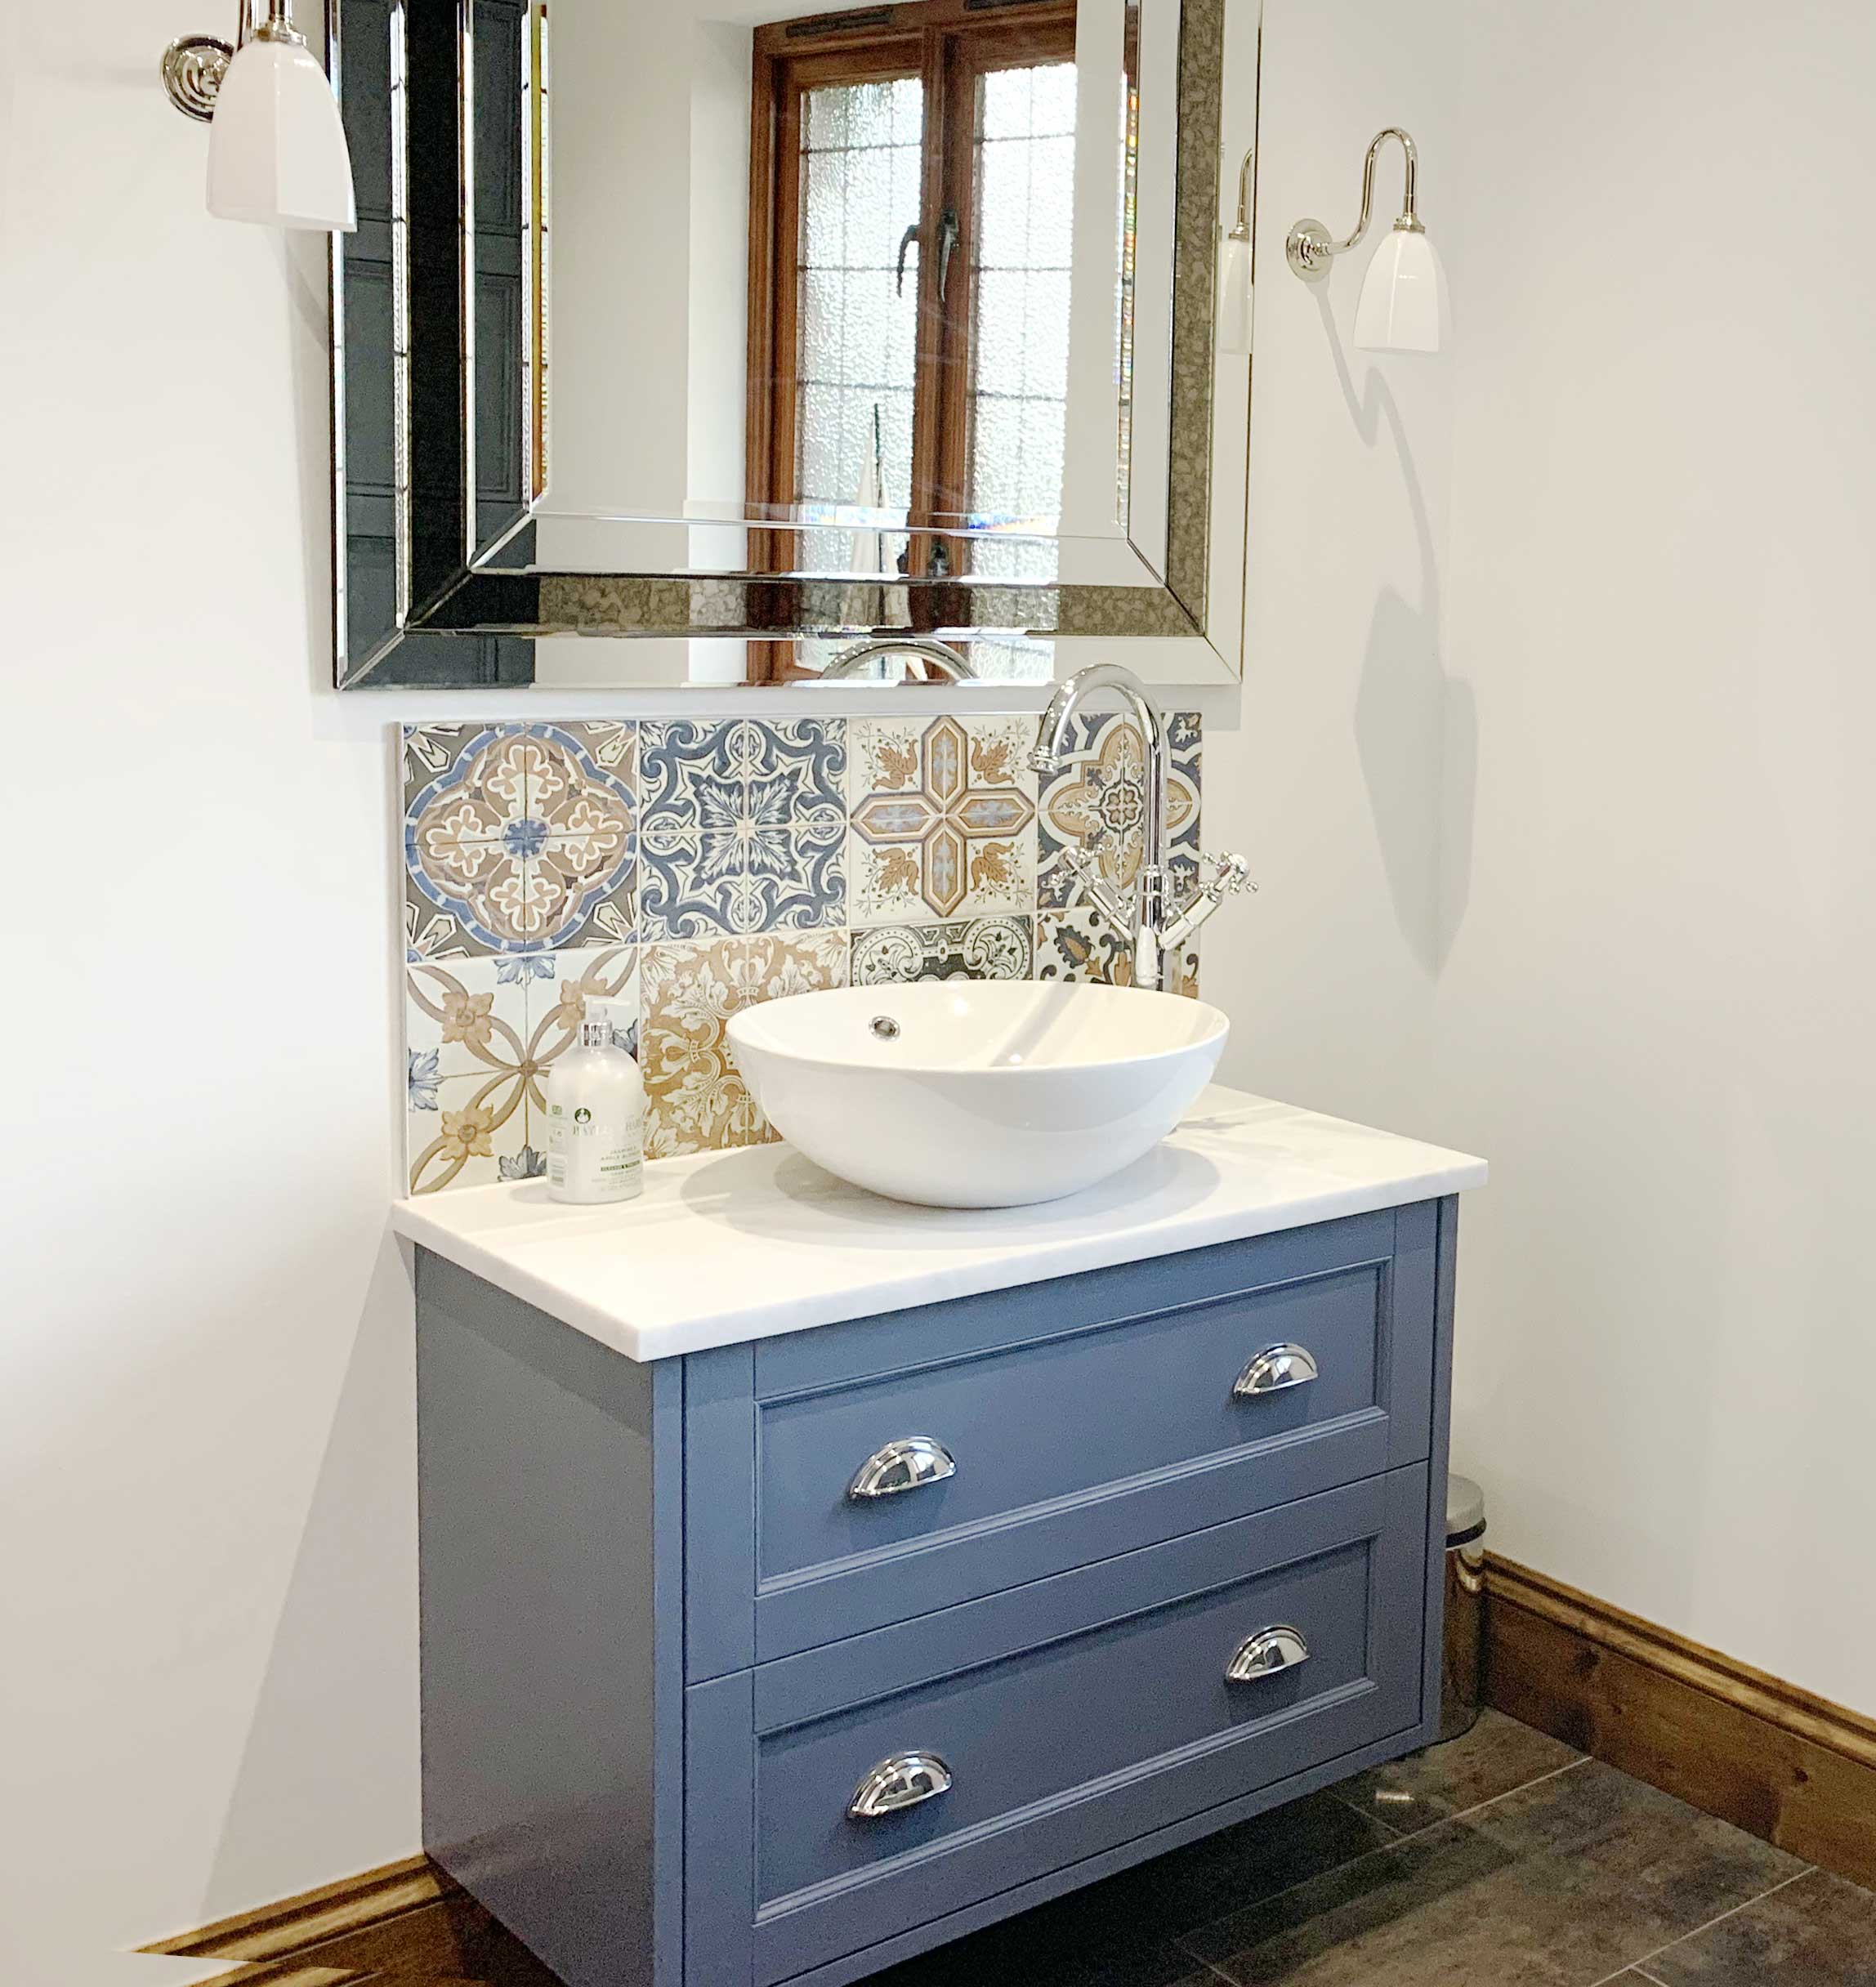 Traditional vanity unit paired with a modern basin and statement tiles make this bathroom